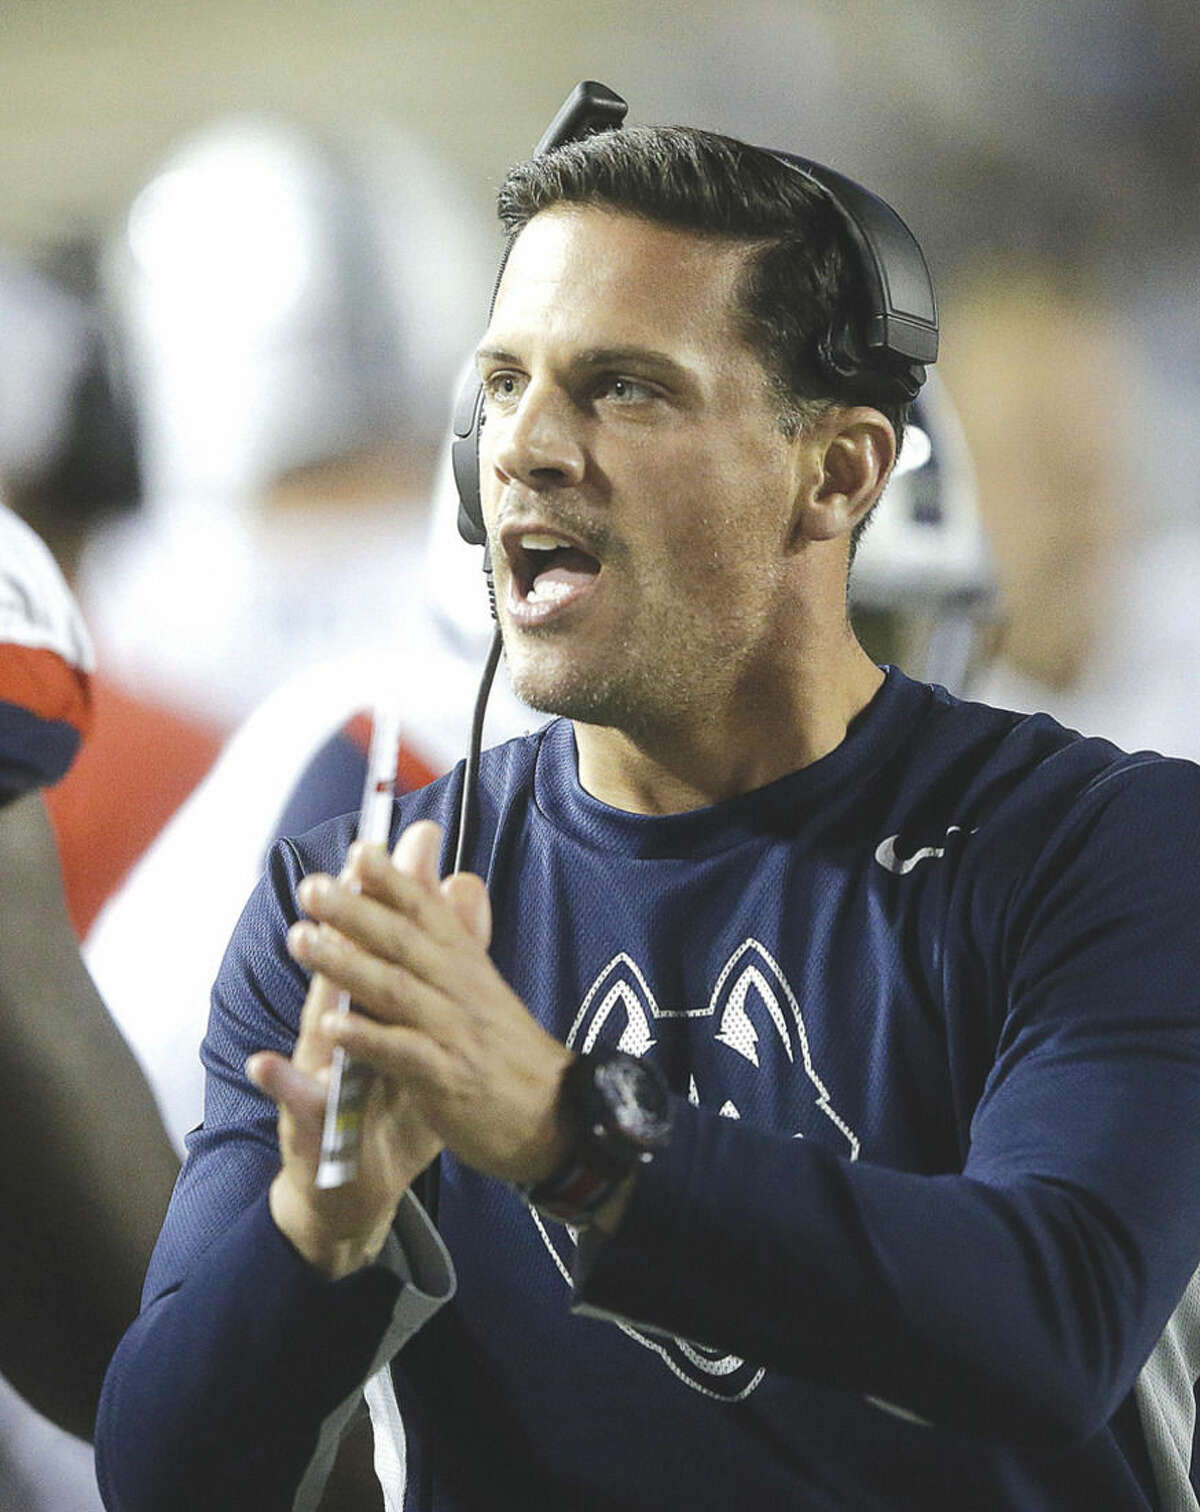 Connecticut head coach Bob Diaco shouts to his team in the first half during an NCAA college football game against BYU Friday, Oct. 2, 2015, in Provo, Utah. (AP Photo/Rick Bowmer)